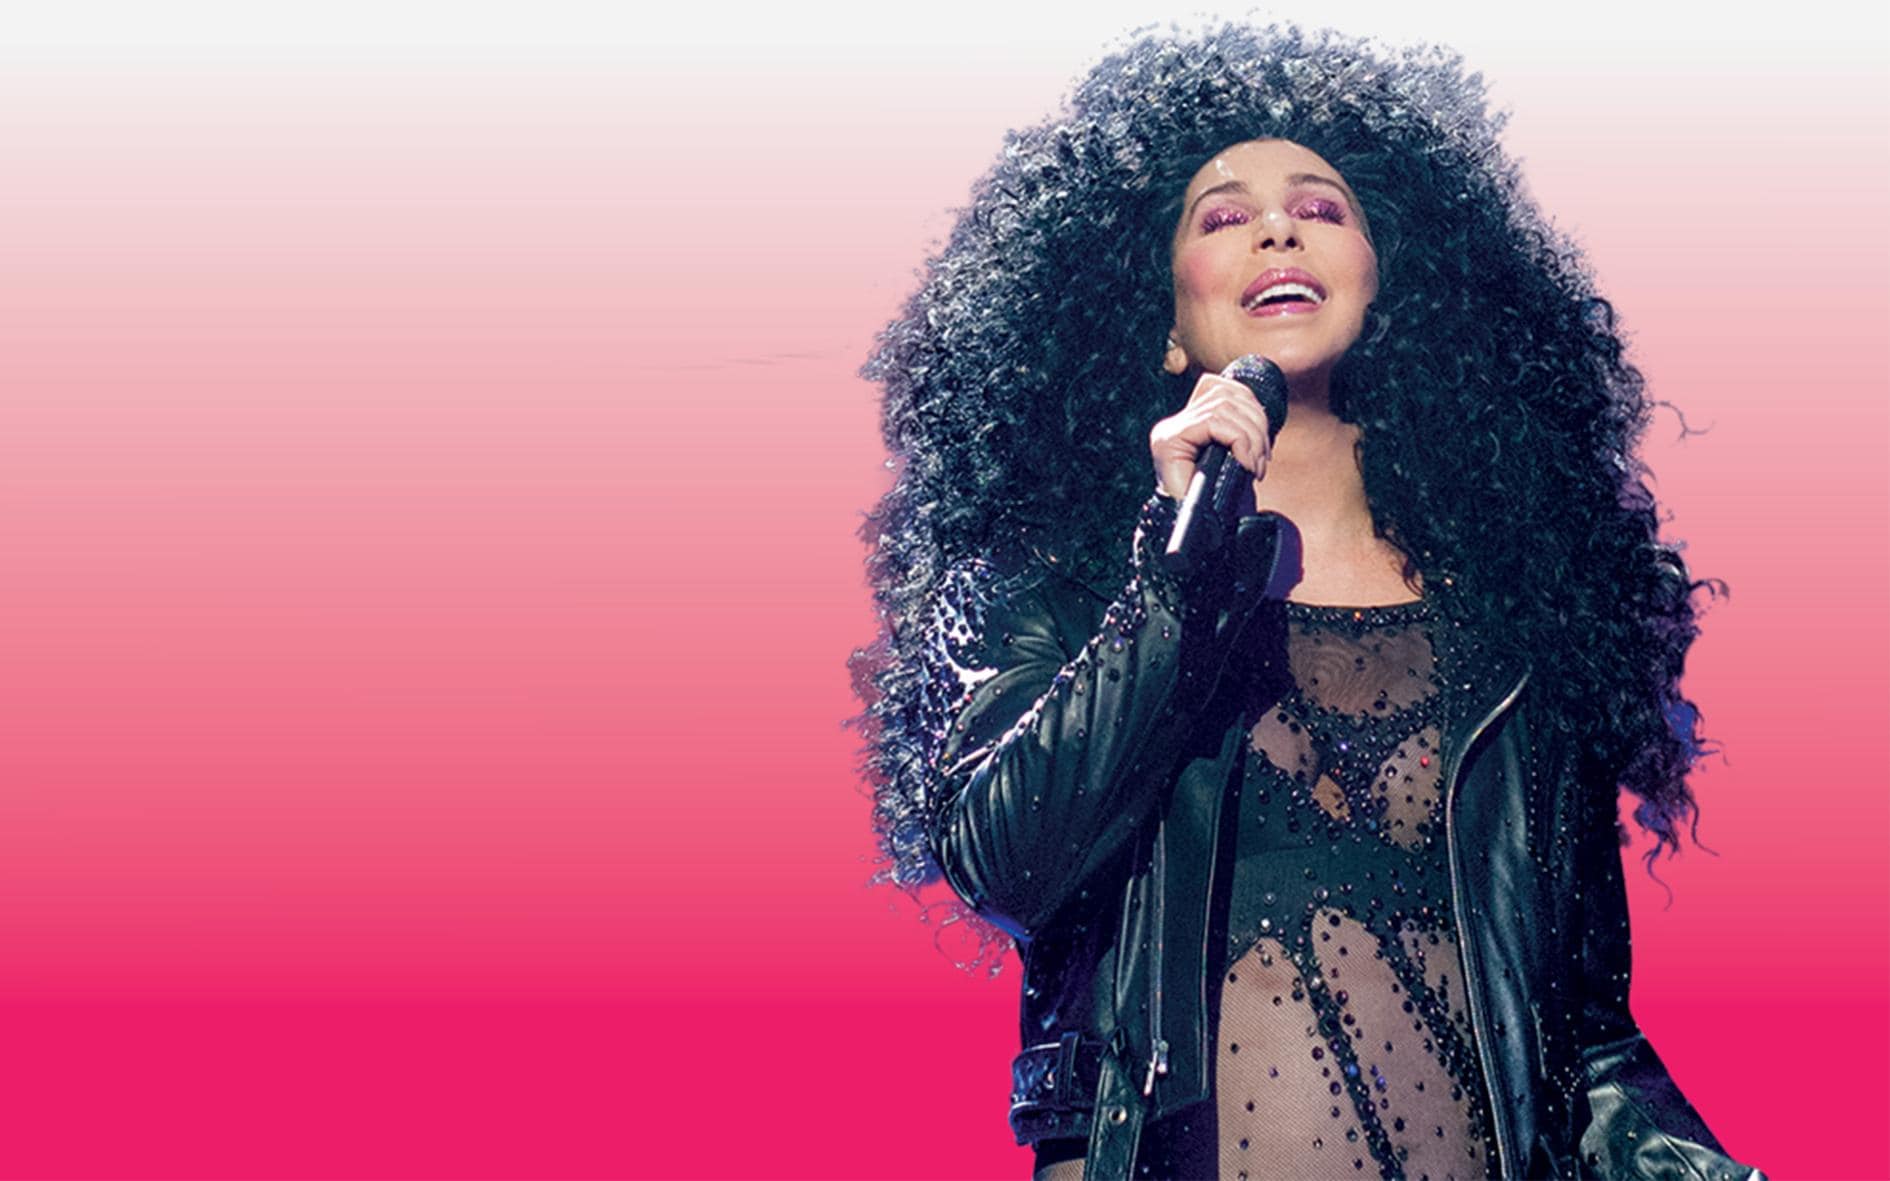 Cher is back on the charts with 'Woman's World